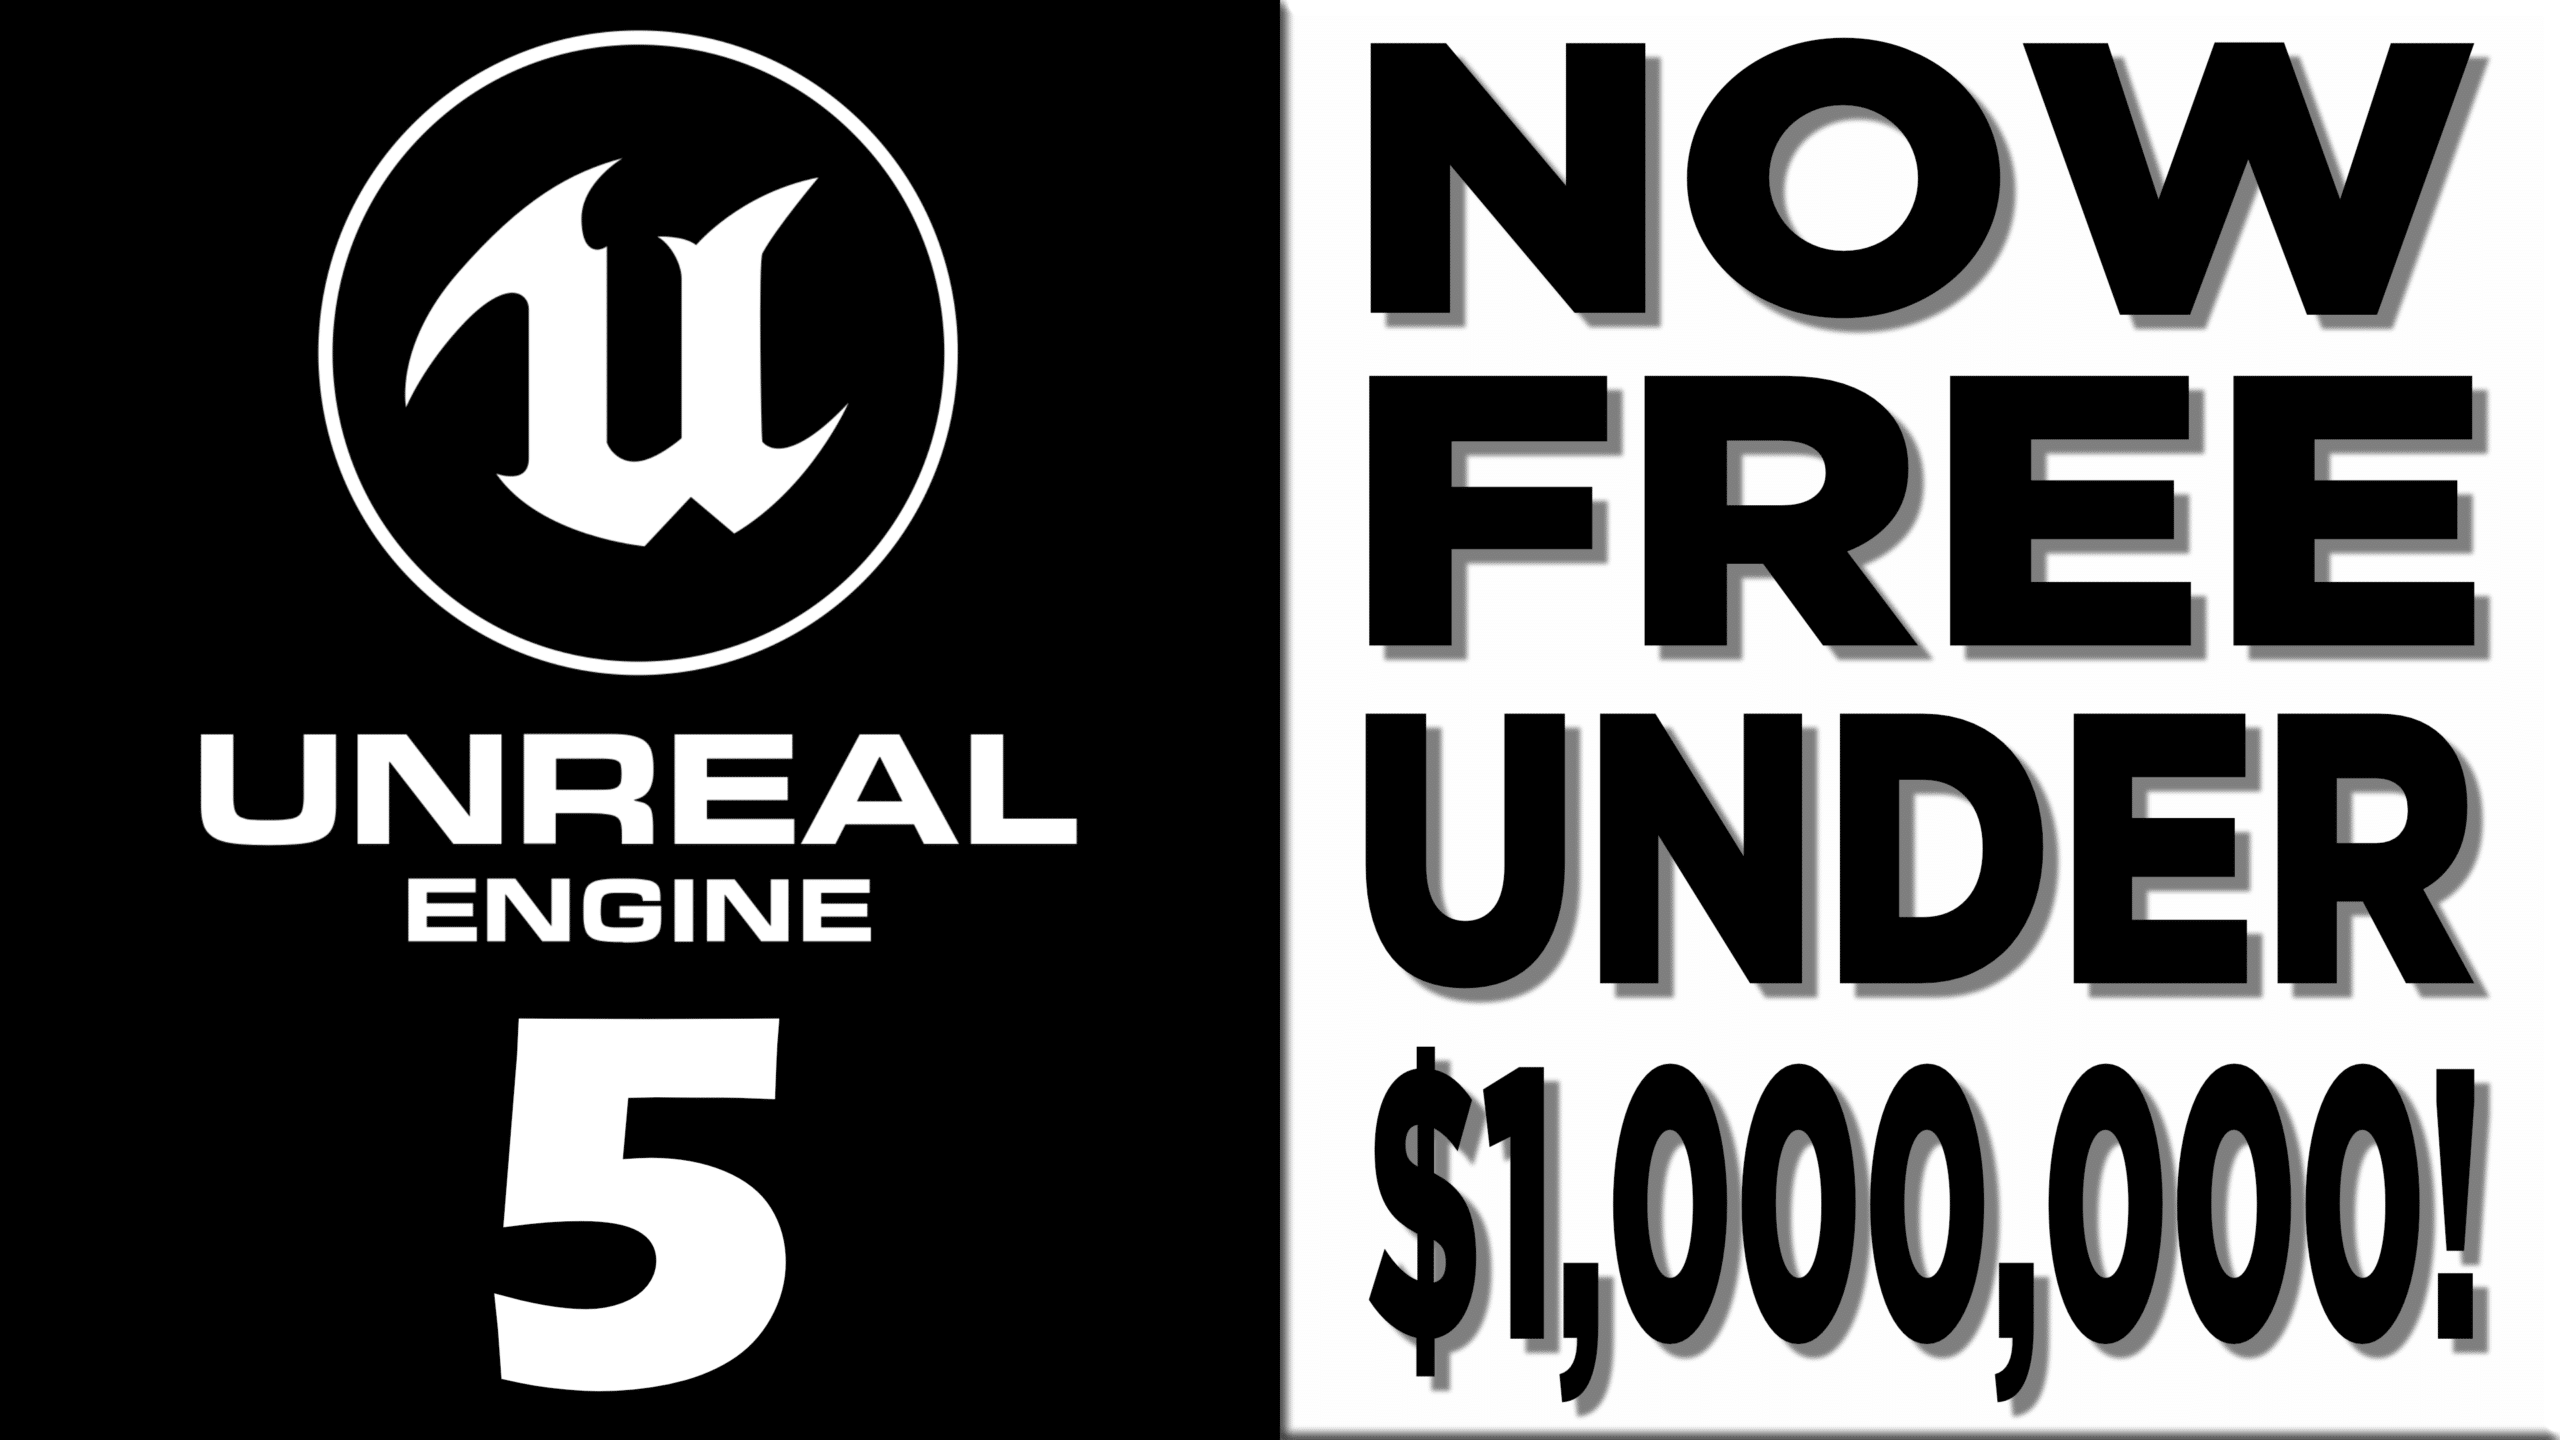 Unreal Engine is now royalty-free until a game makes a whopping $1